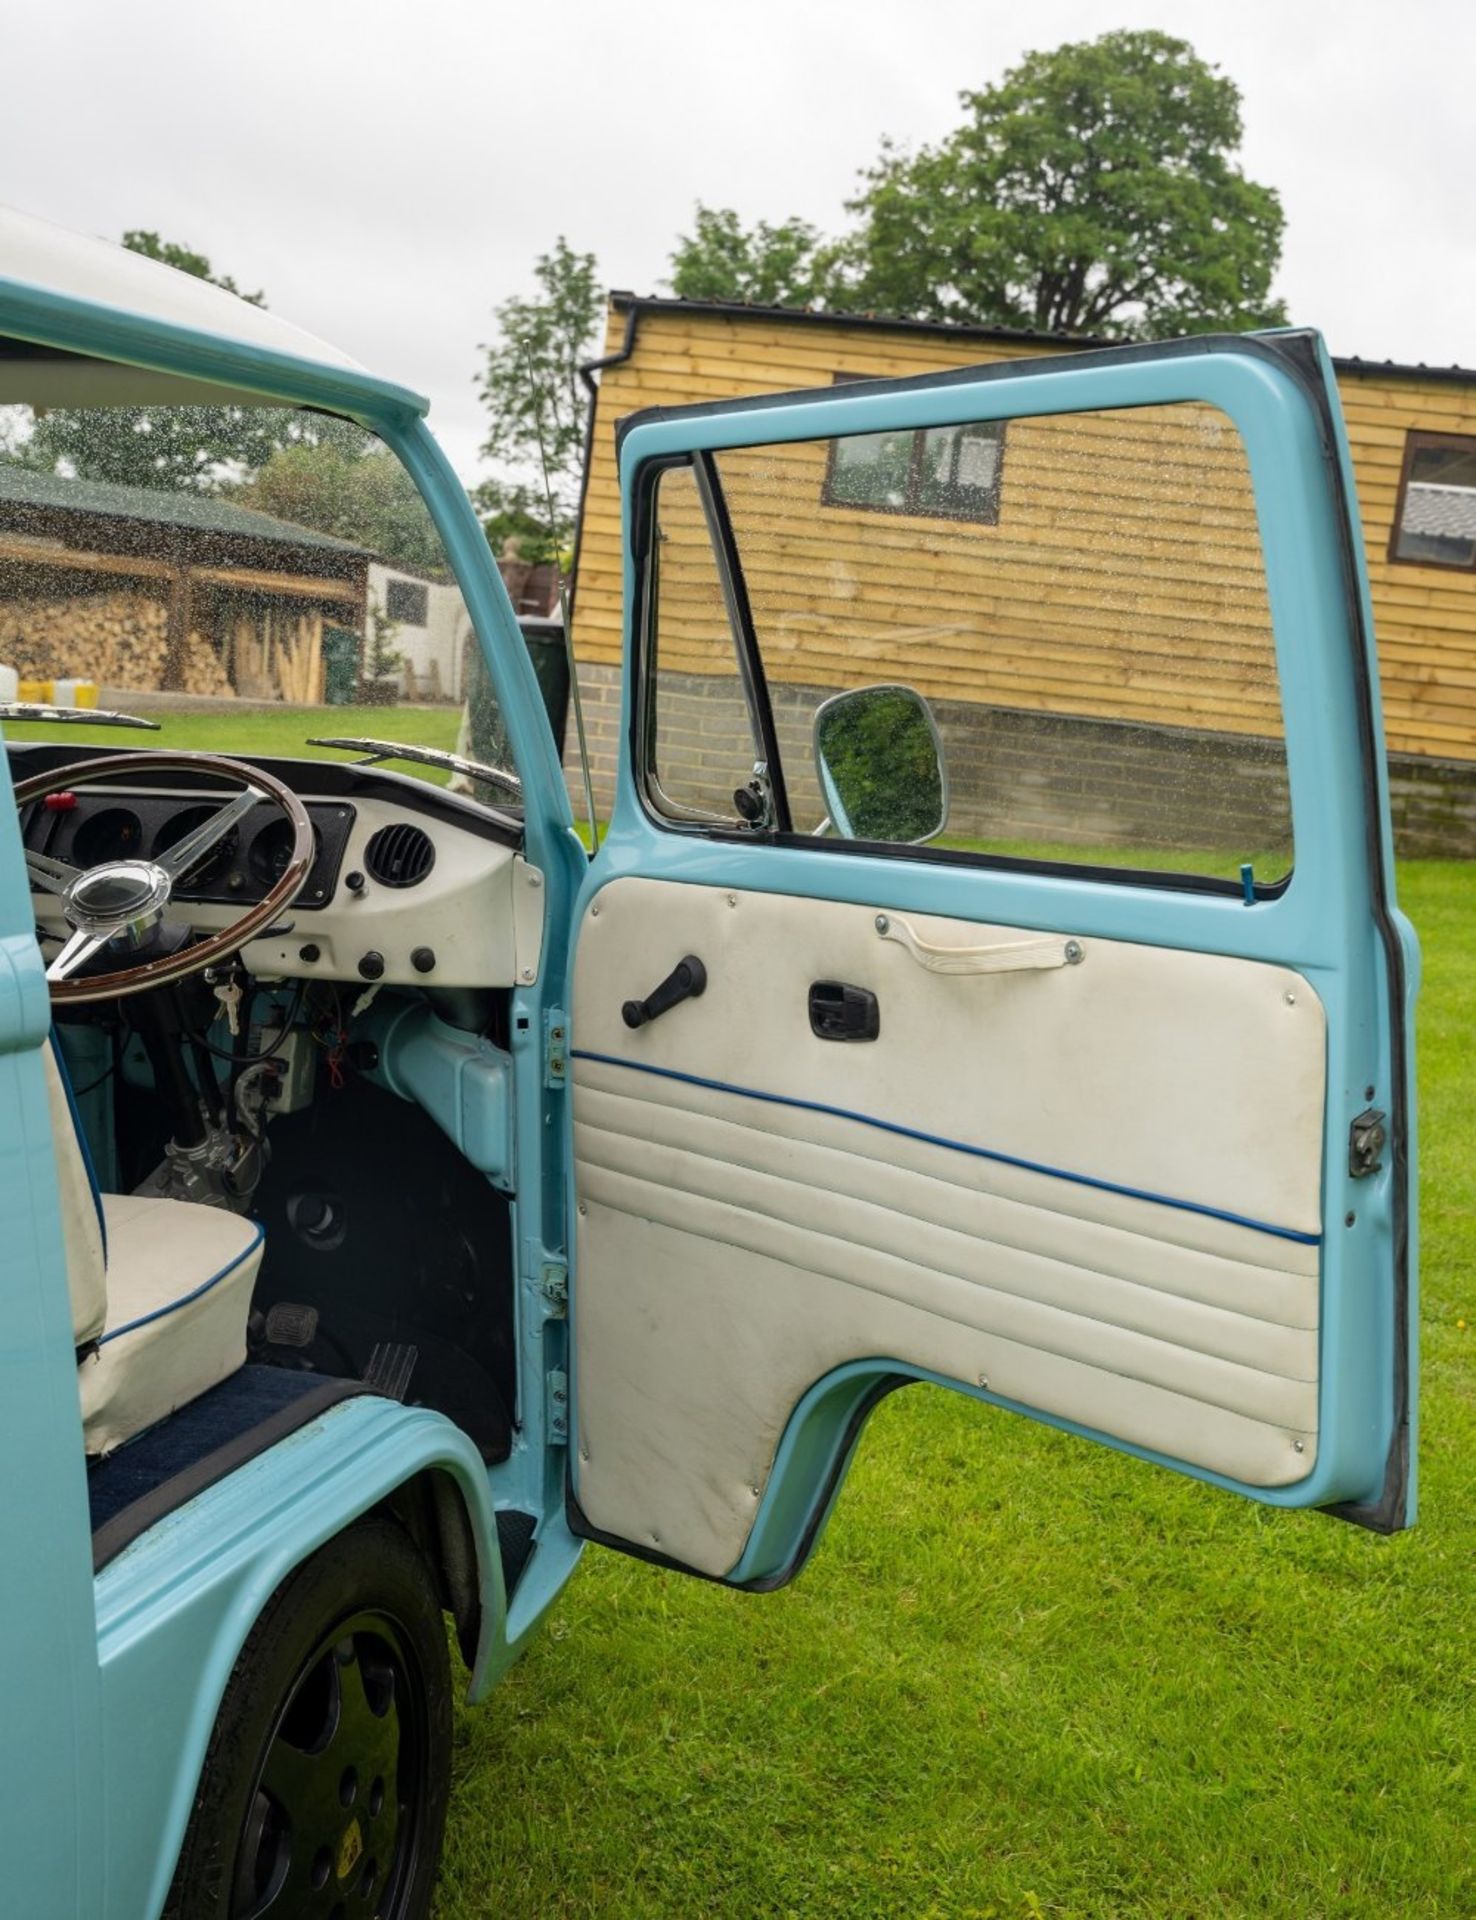 1974 VOLKSWAGEN TYPE 2 DOUBLE-CAB PICKUP Registration Number: VMR 491M Chassis Number: 2642-126- - Image 11 of 20